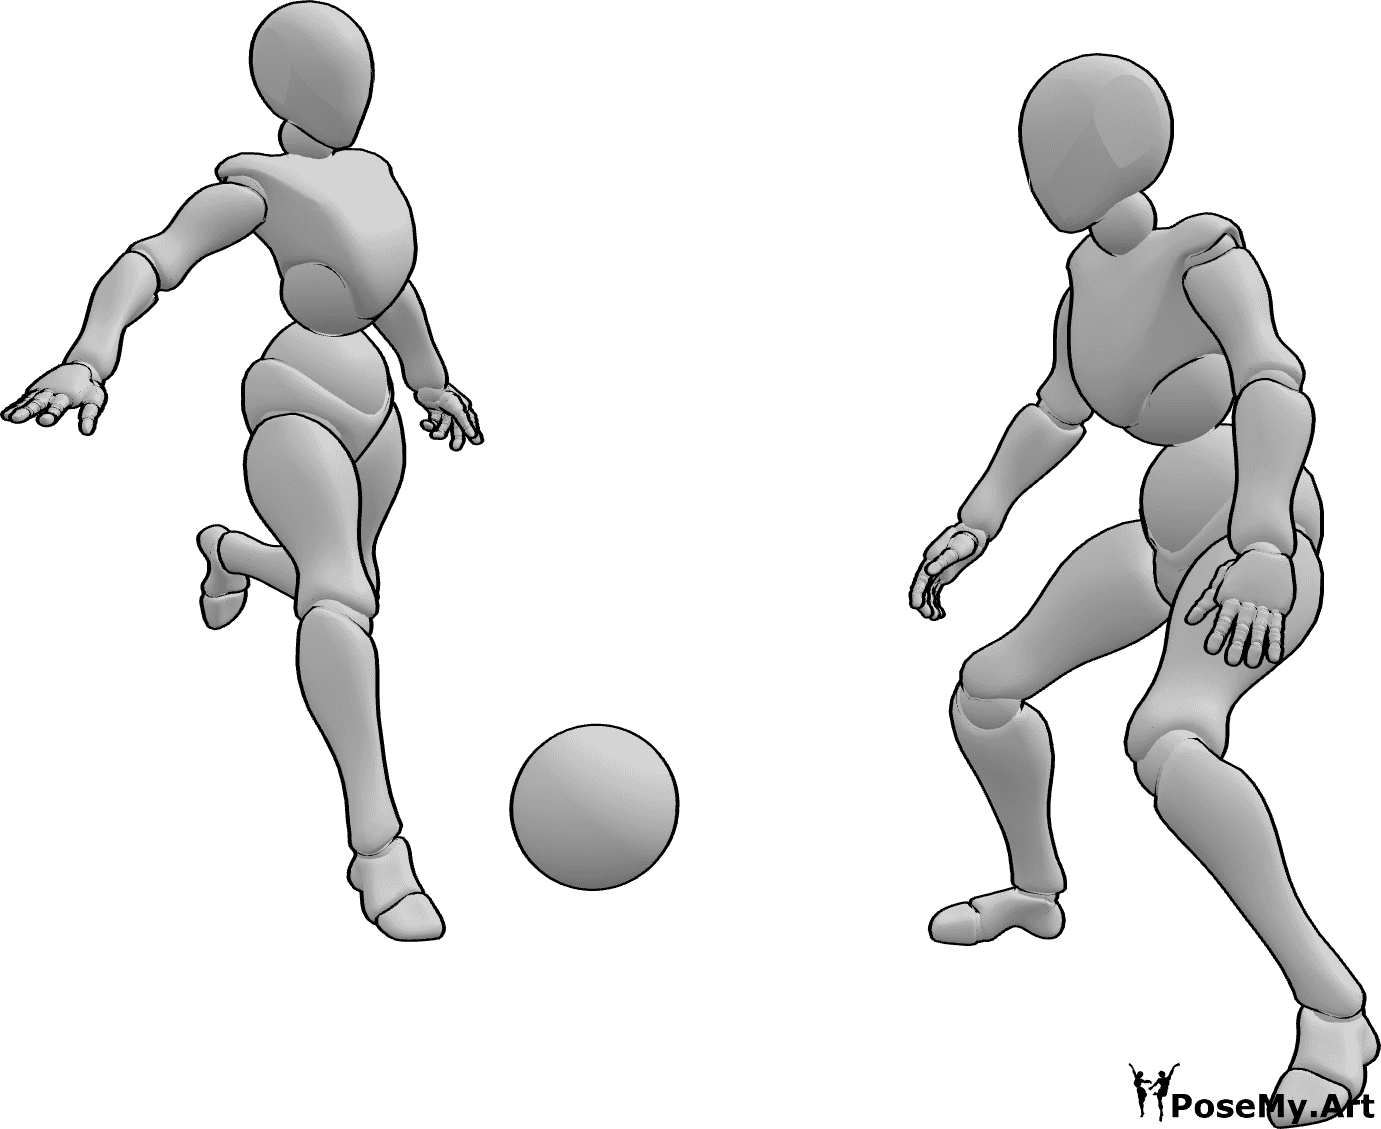 Pose Reference- Female soccer pose - Two females are playing soccer pose